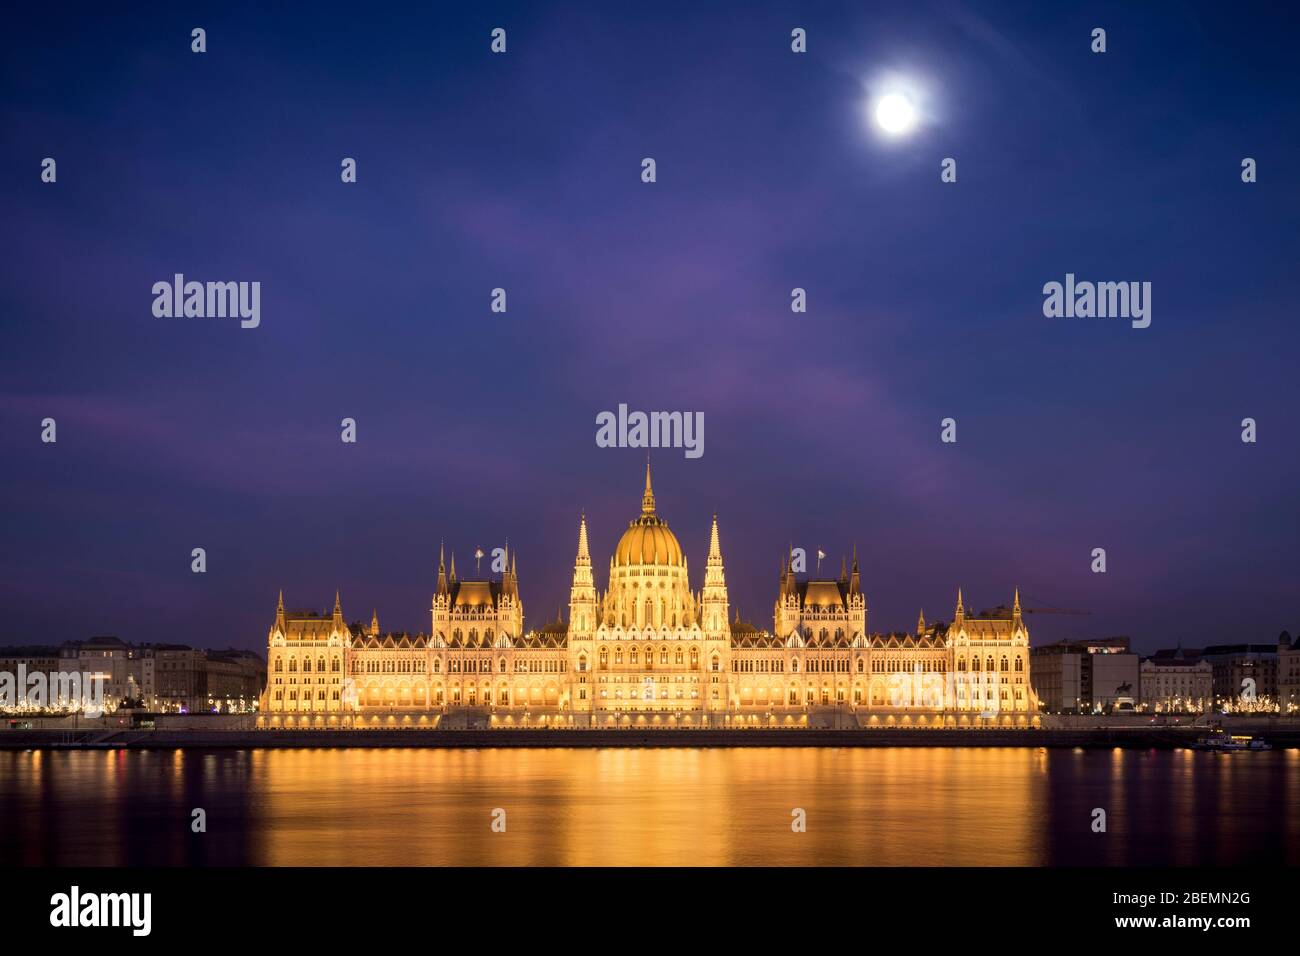 Moonrise over the Hungarian Parliament Building at night as seen from opposite bank of the Danube, Budapest Stock Photo